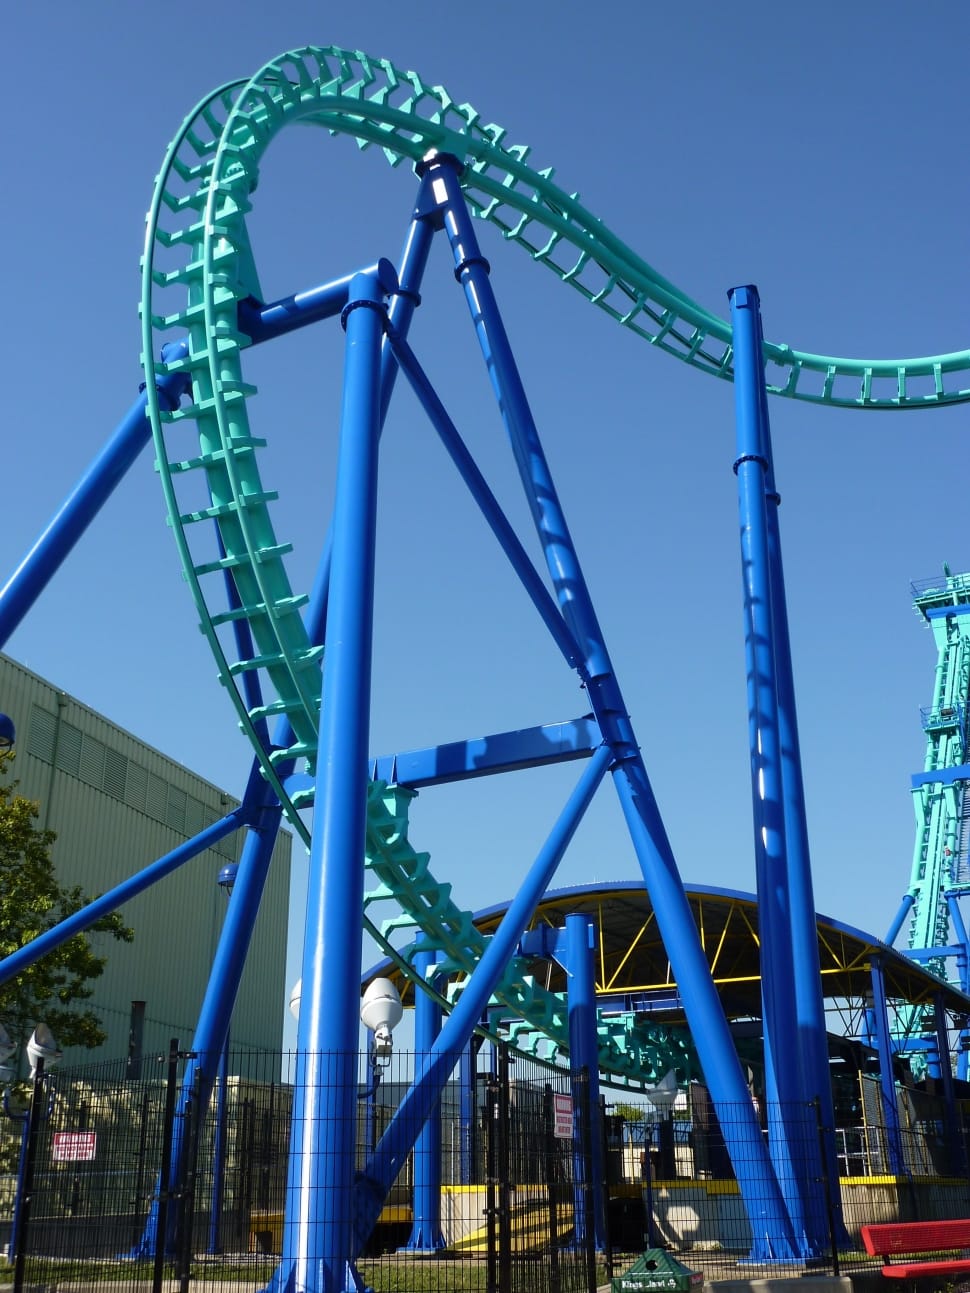 blue and green coaster ride photo preview